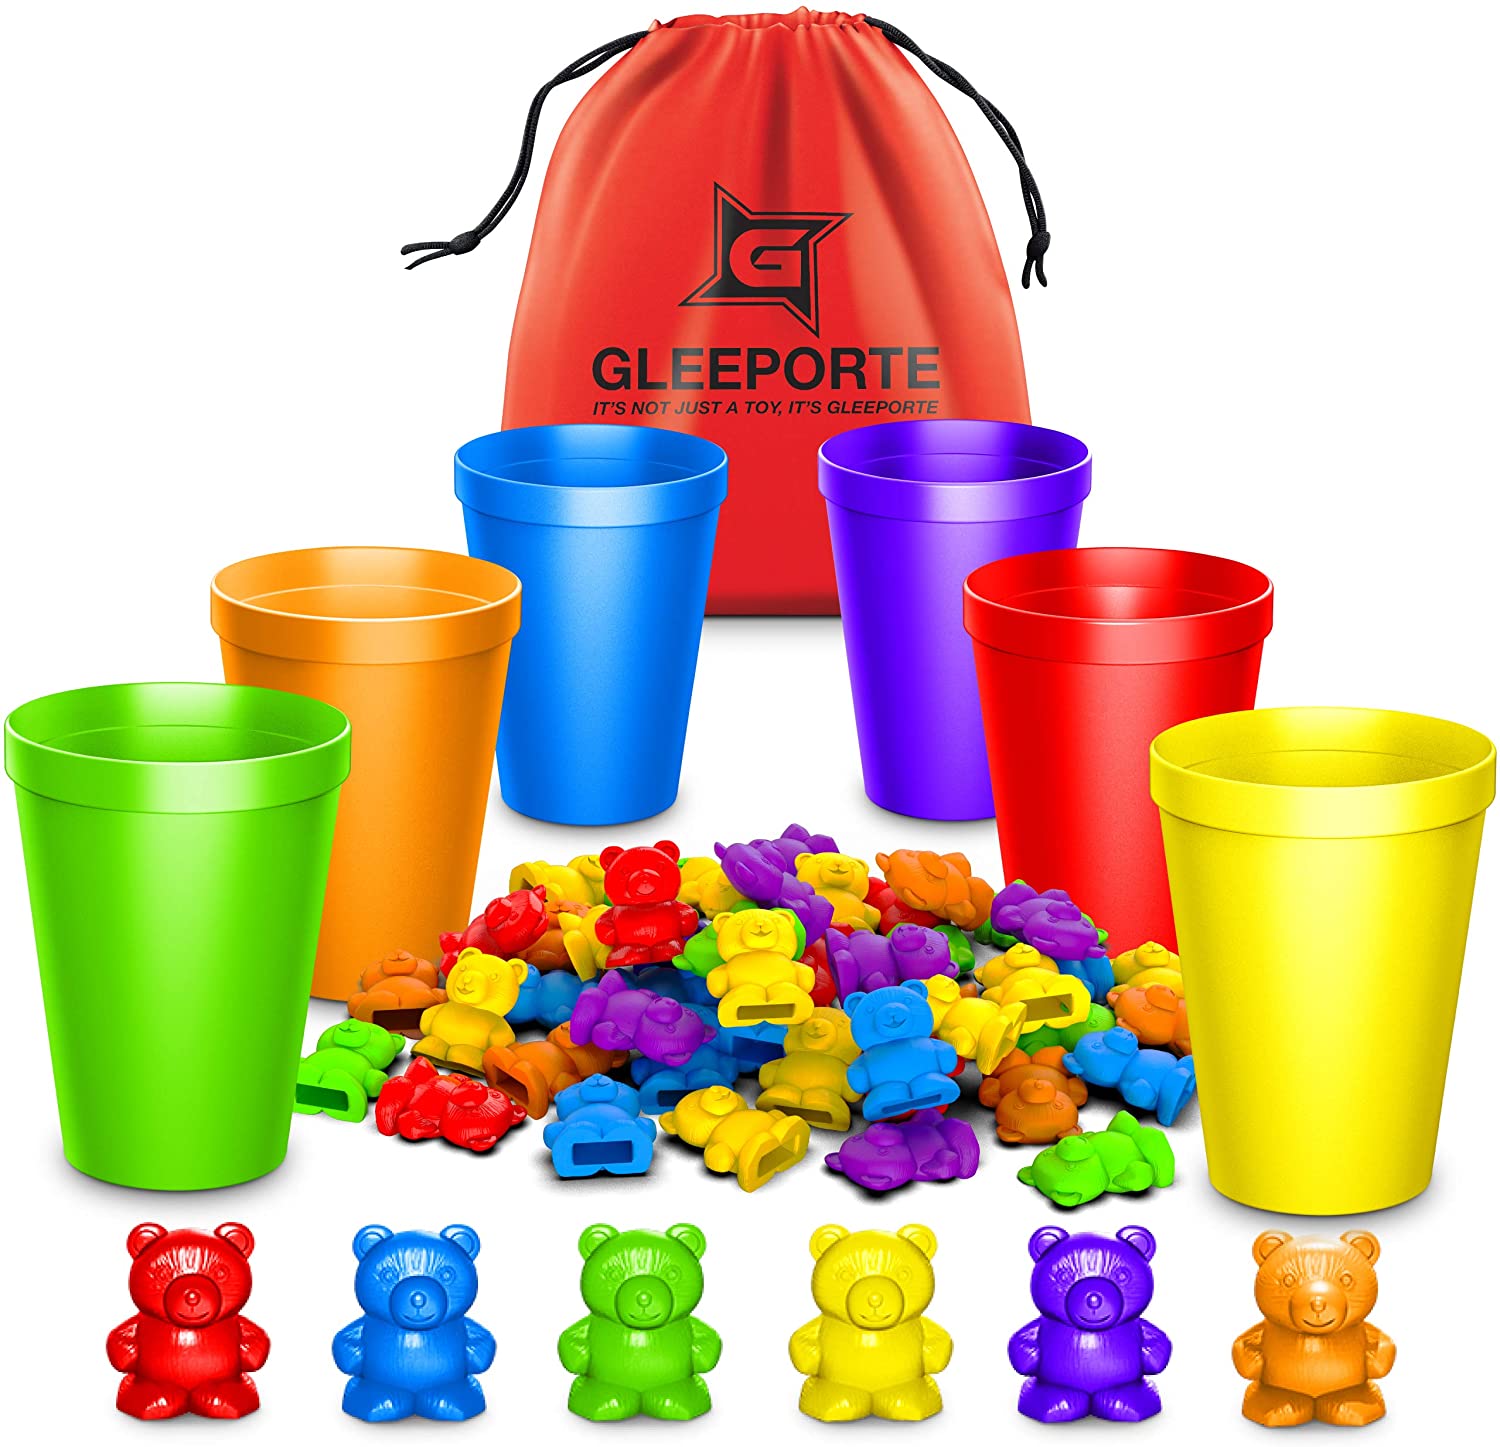 Rainbow Counting Bears With Matching Sorting Cups $6.79 (66% off) shipped